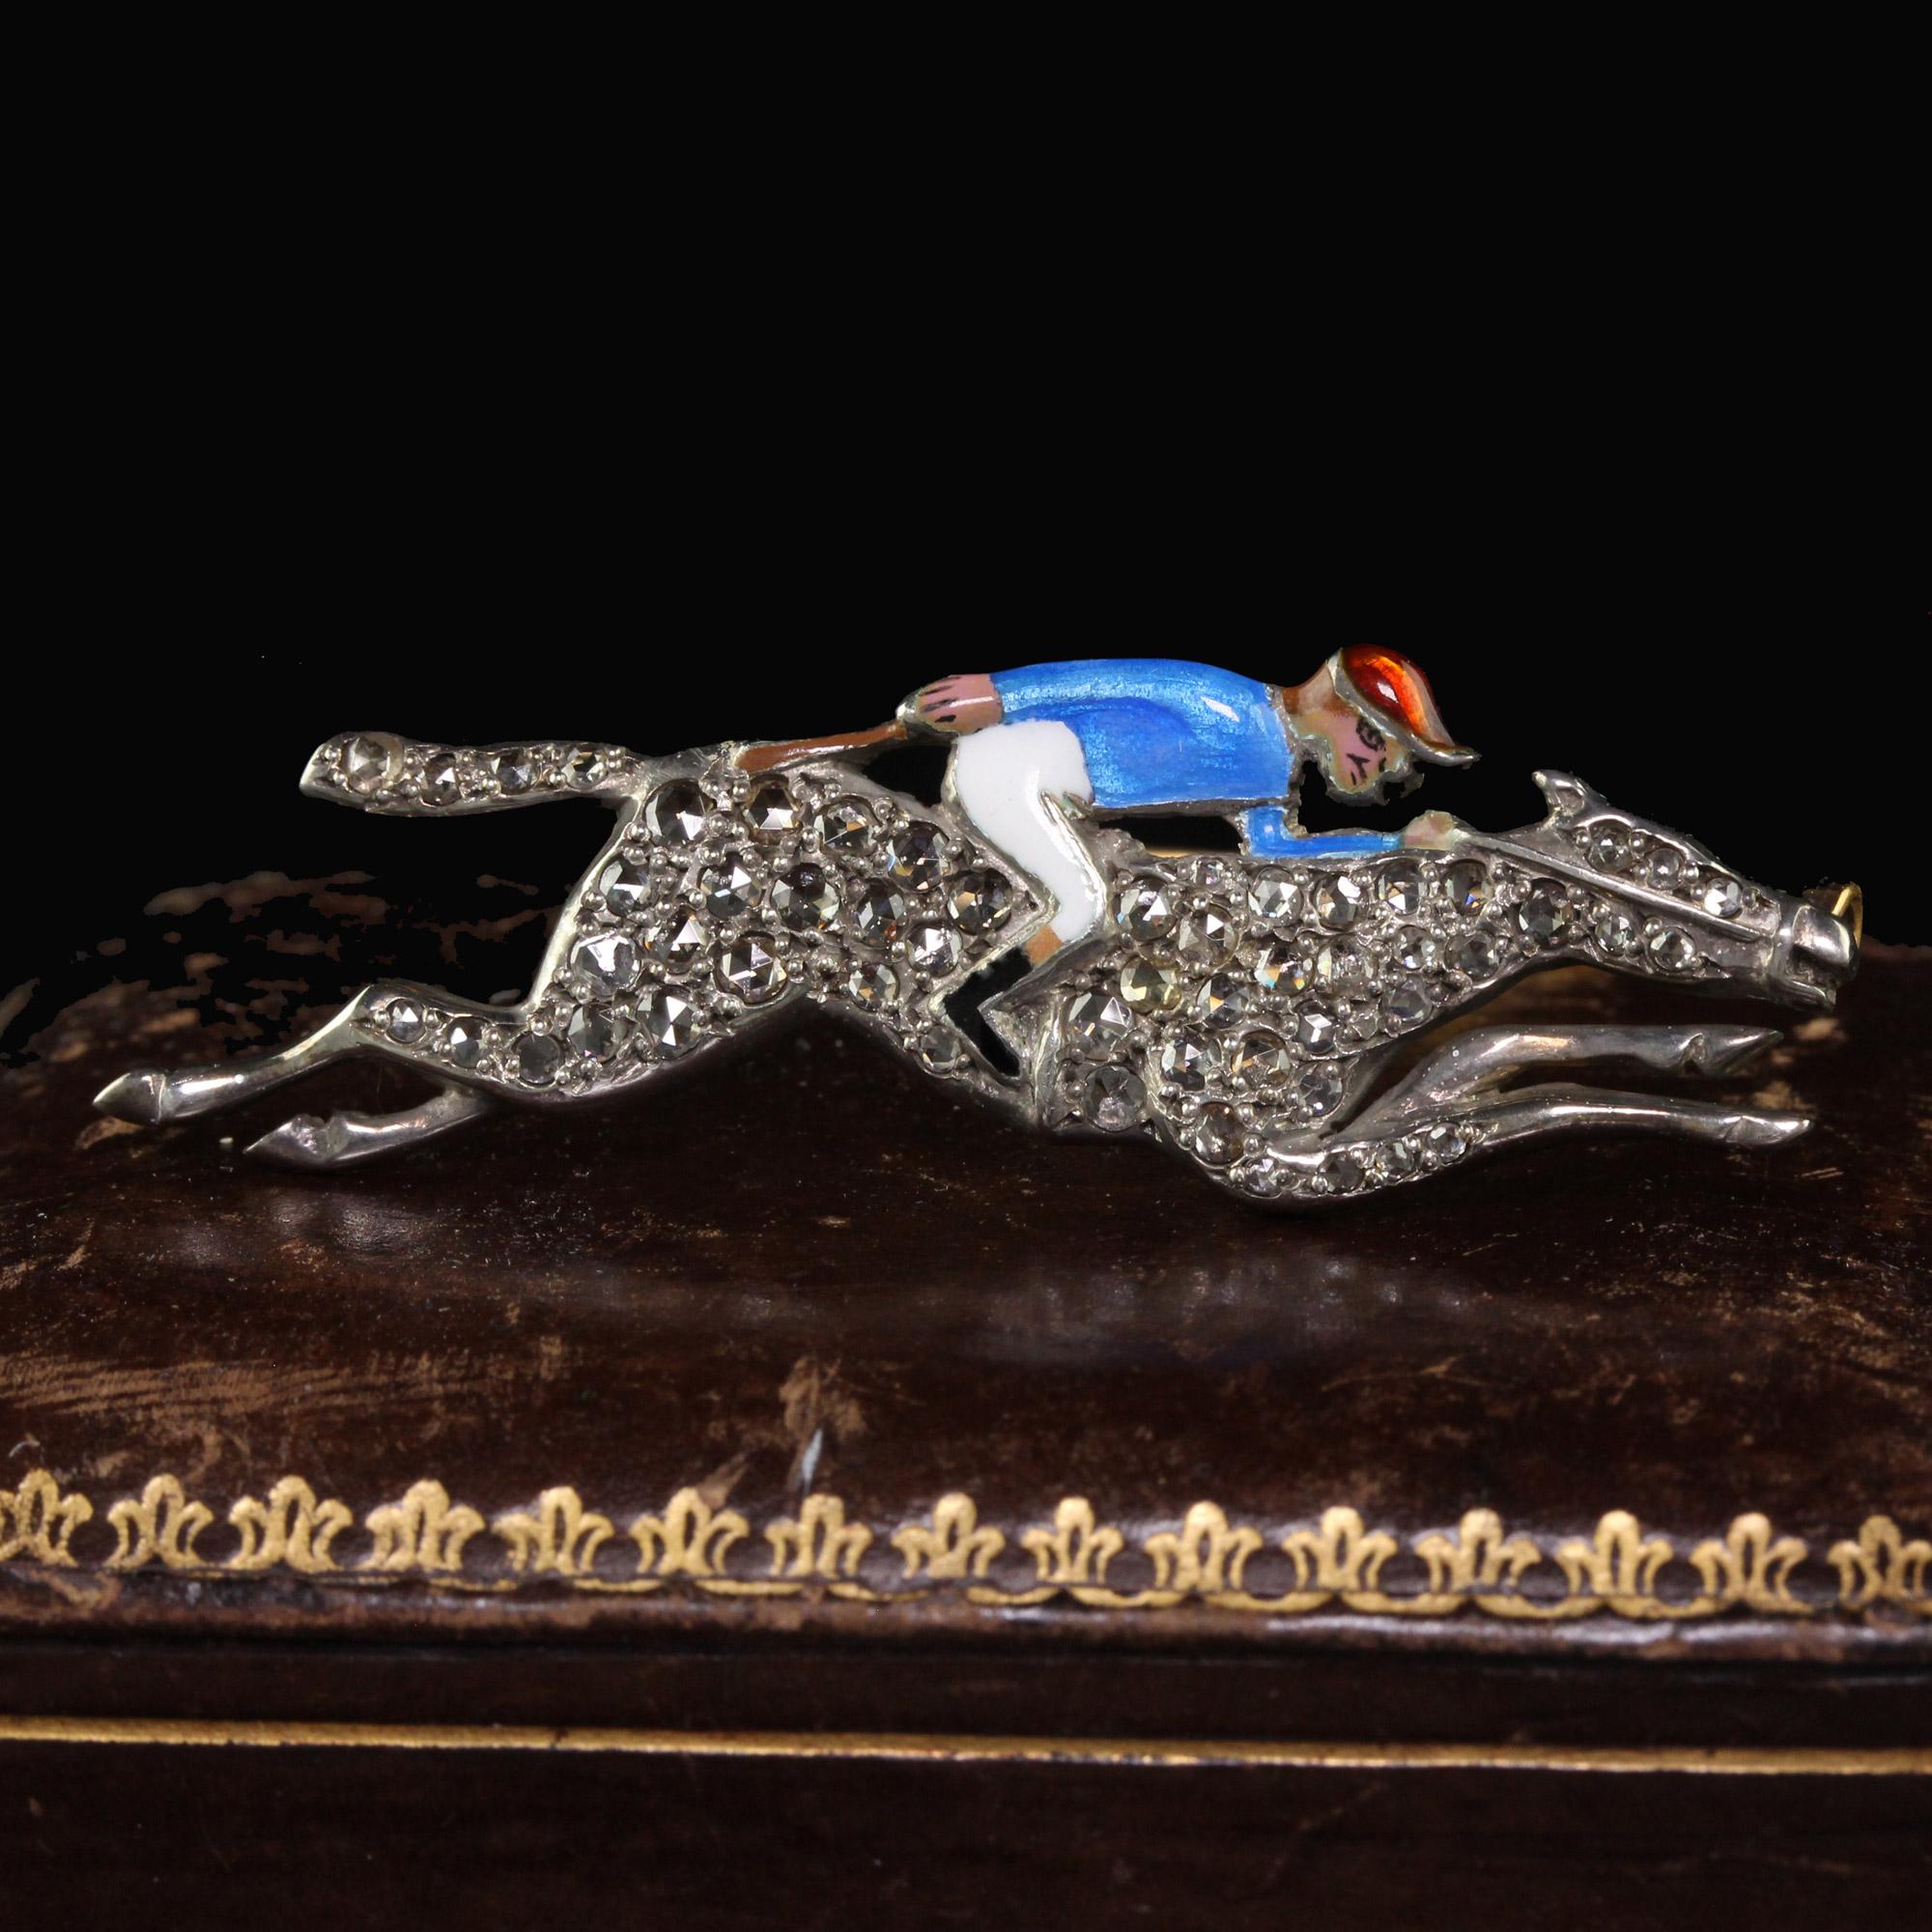 Beautiful Antique Victorian 14K Gold and Silver Rose Cut Diamond Horse Jockey Enamel Pin. This gorgeous antique Victorian jockey pin is crafted in 14k yellow gold and silver. The pin features a horse jockey that has enamel on it on a horse that has